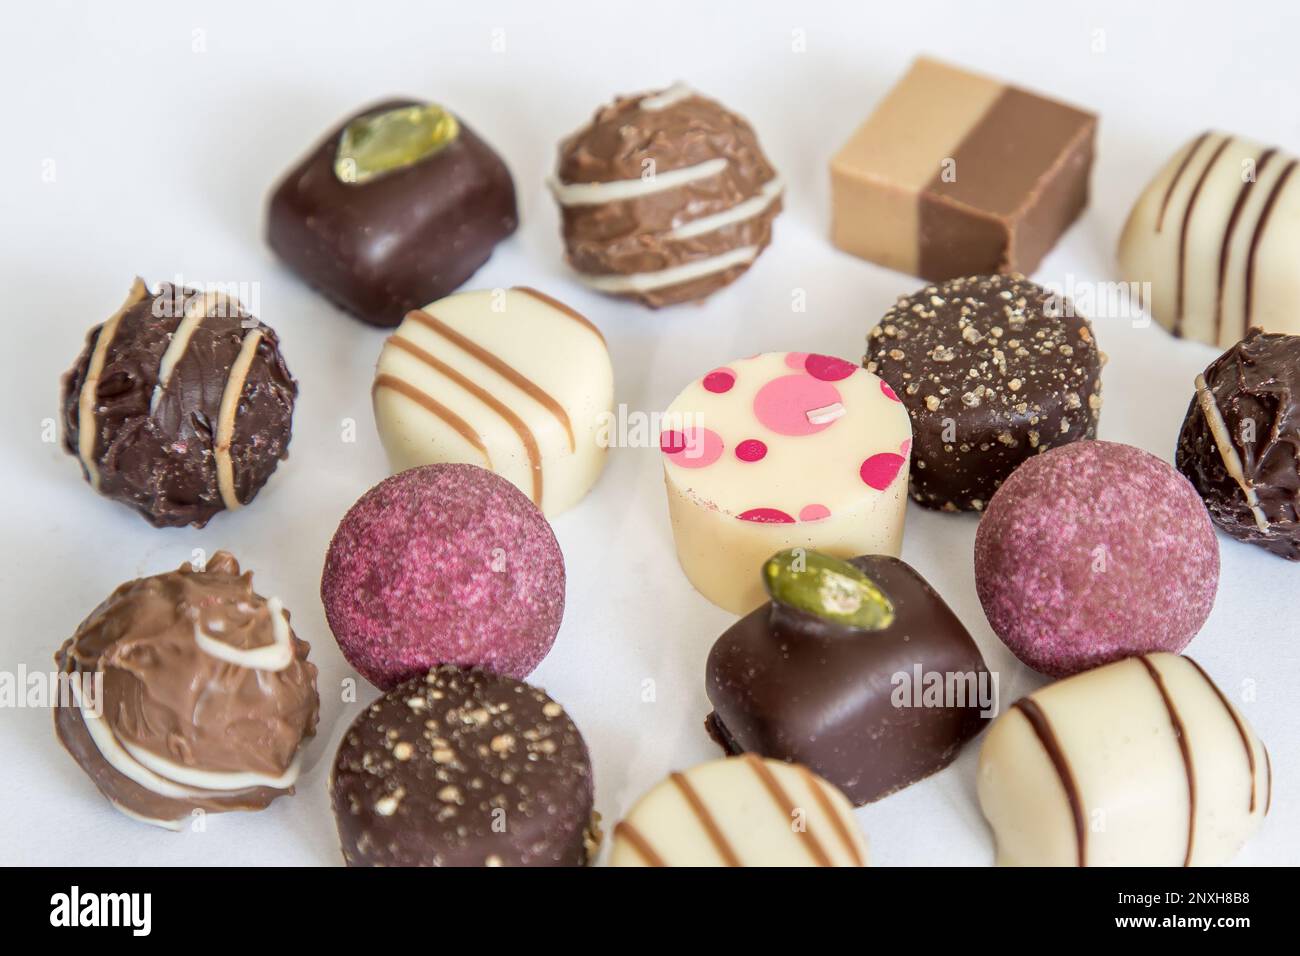 Assortment sweet confectionery of chocolate, candies and pralines. Stock Photo